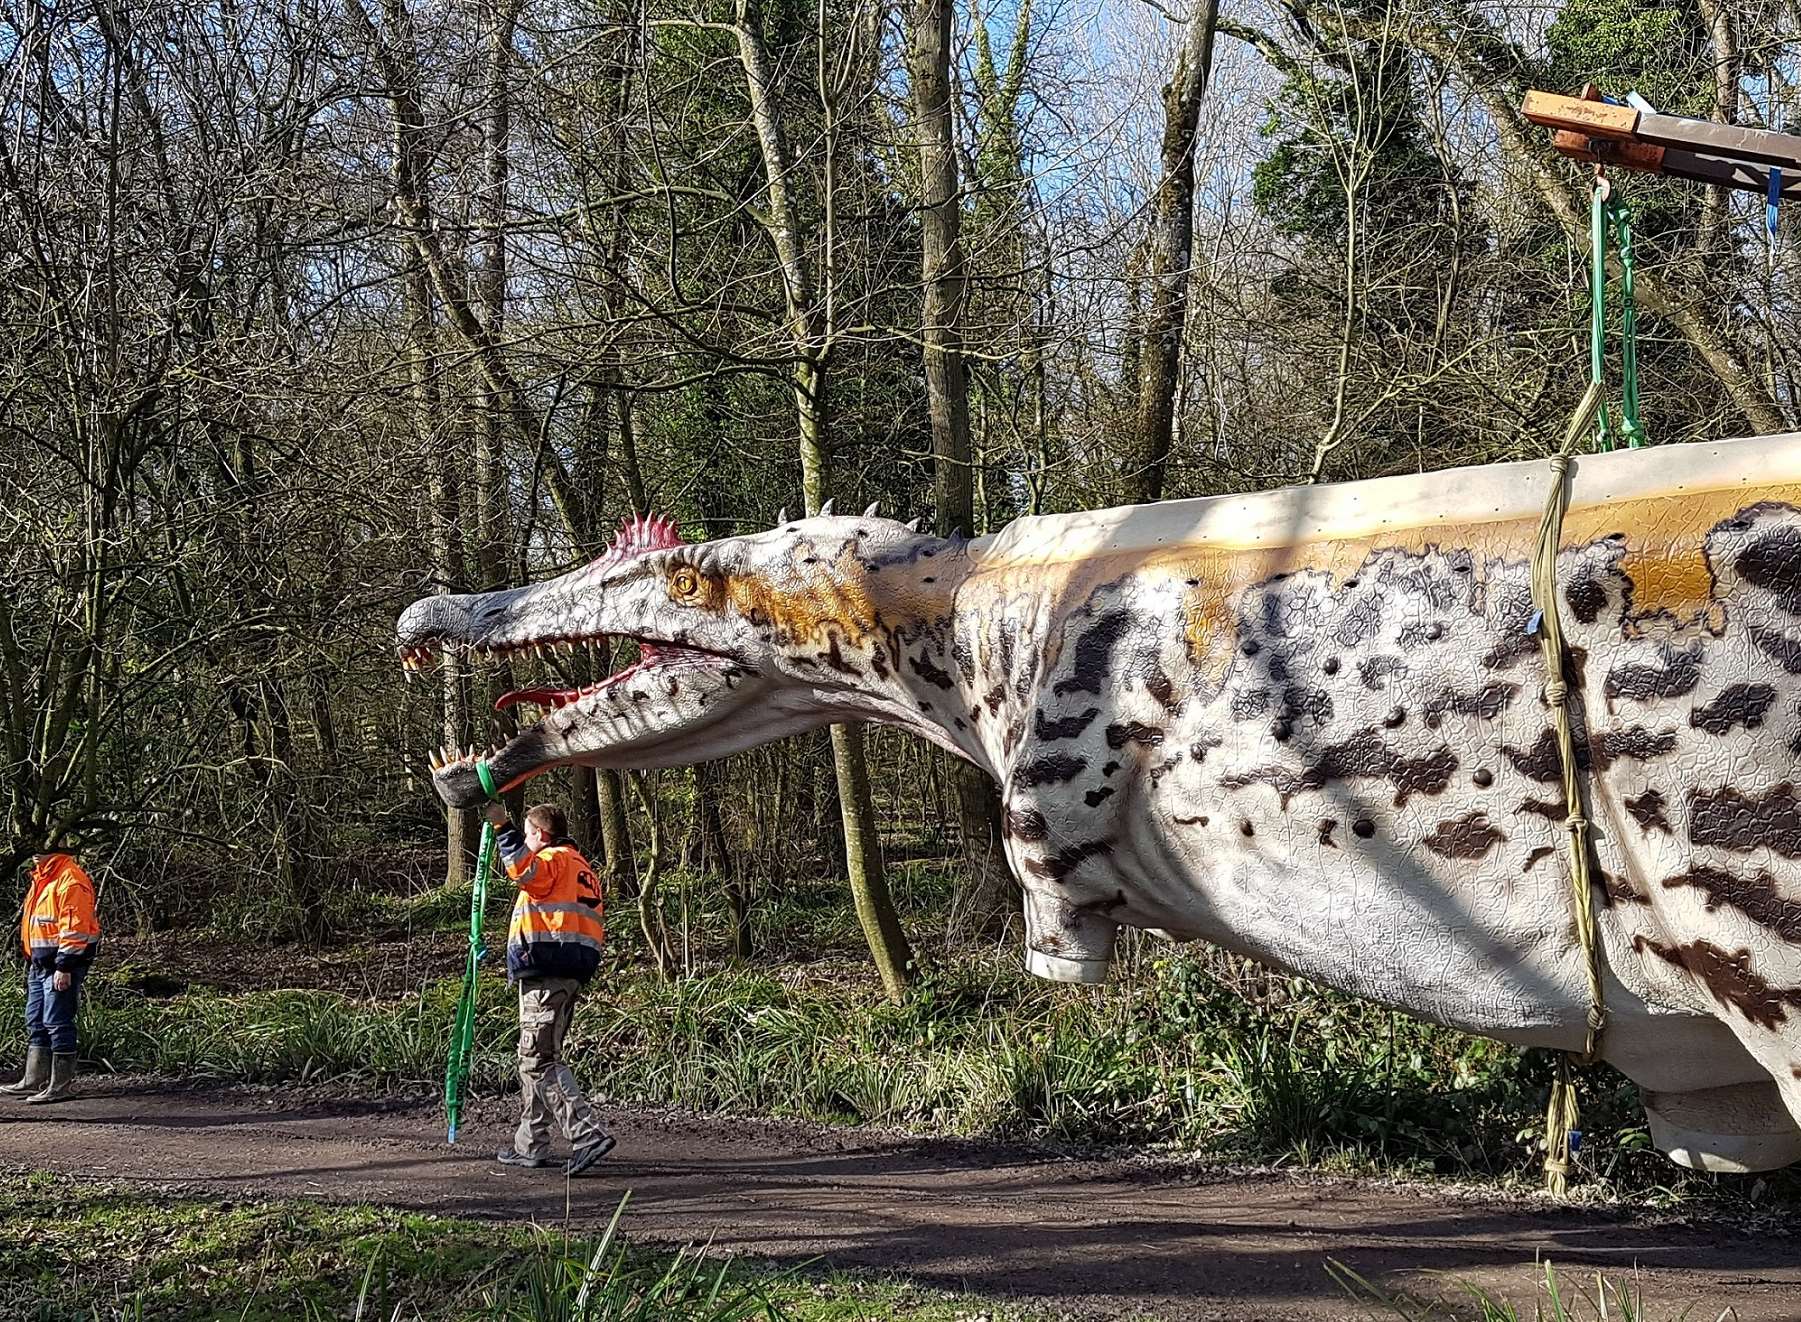 The Spinosaurus was accompanied into the forest.